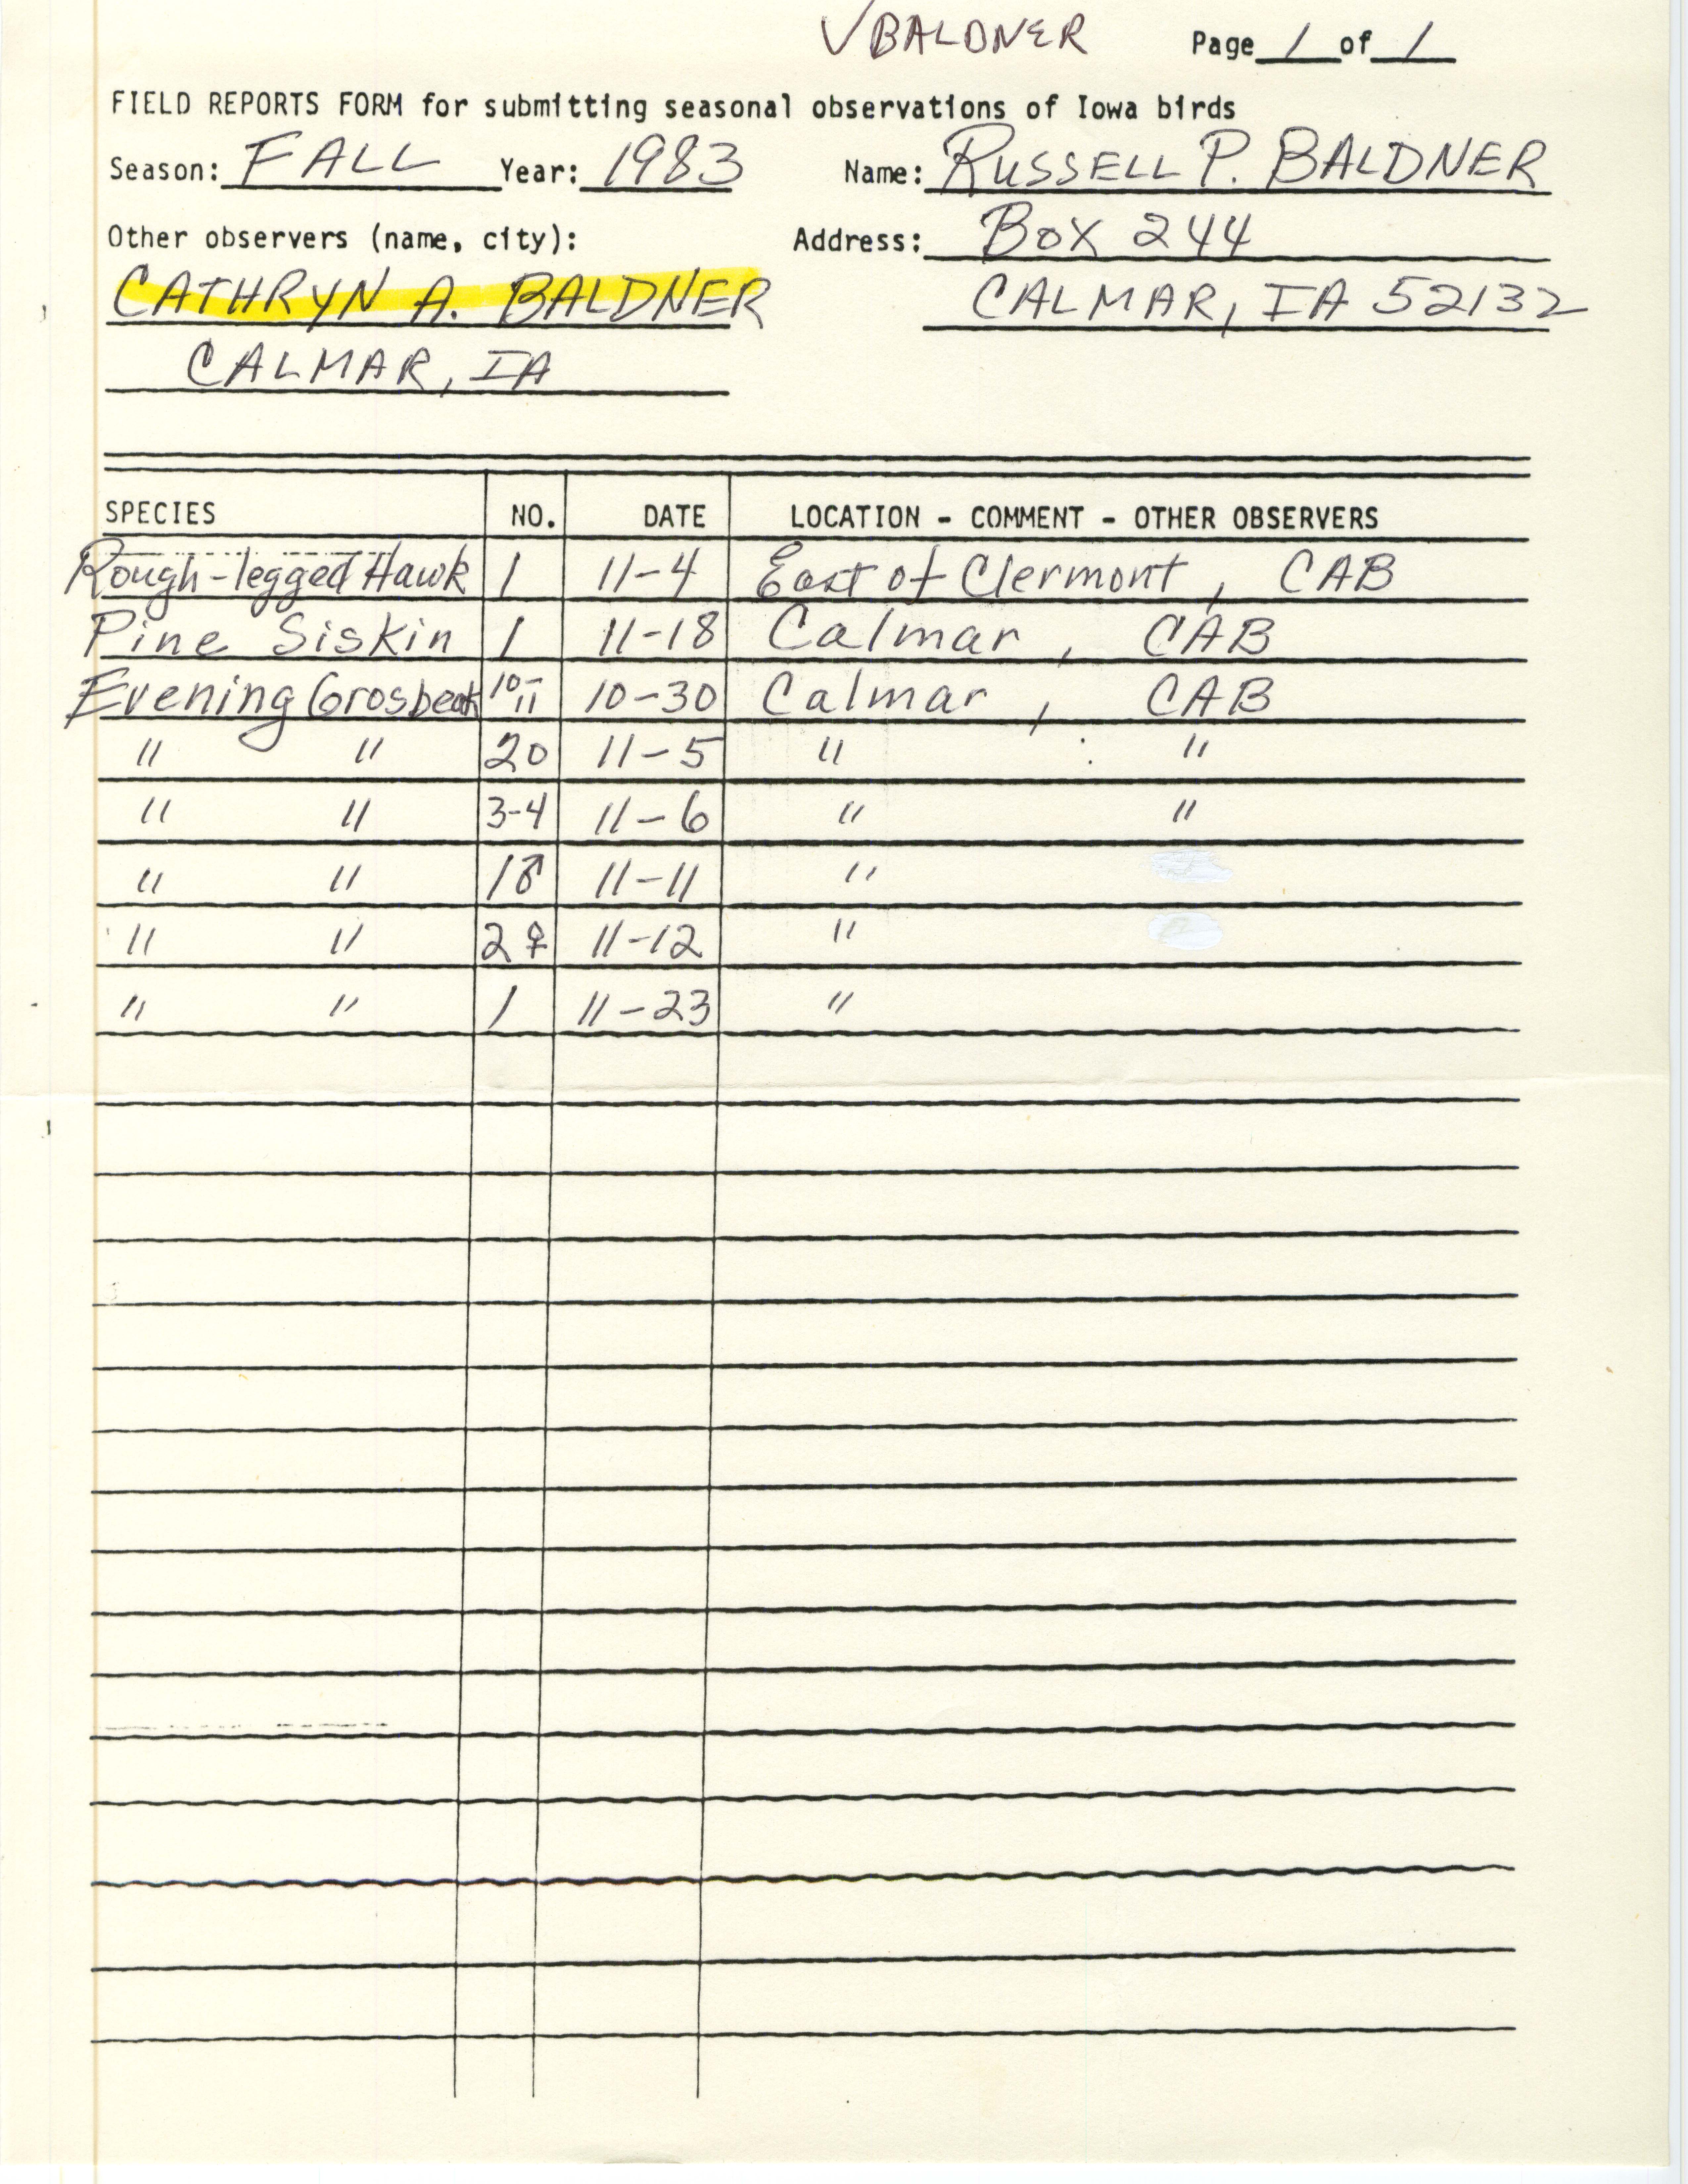 Field reports form for submitting seasonal observations of Iowa birds, Russell Baldner, fall 1983